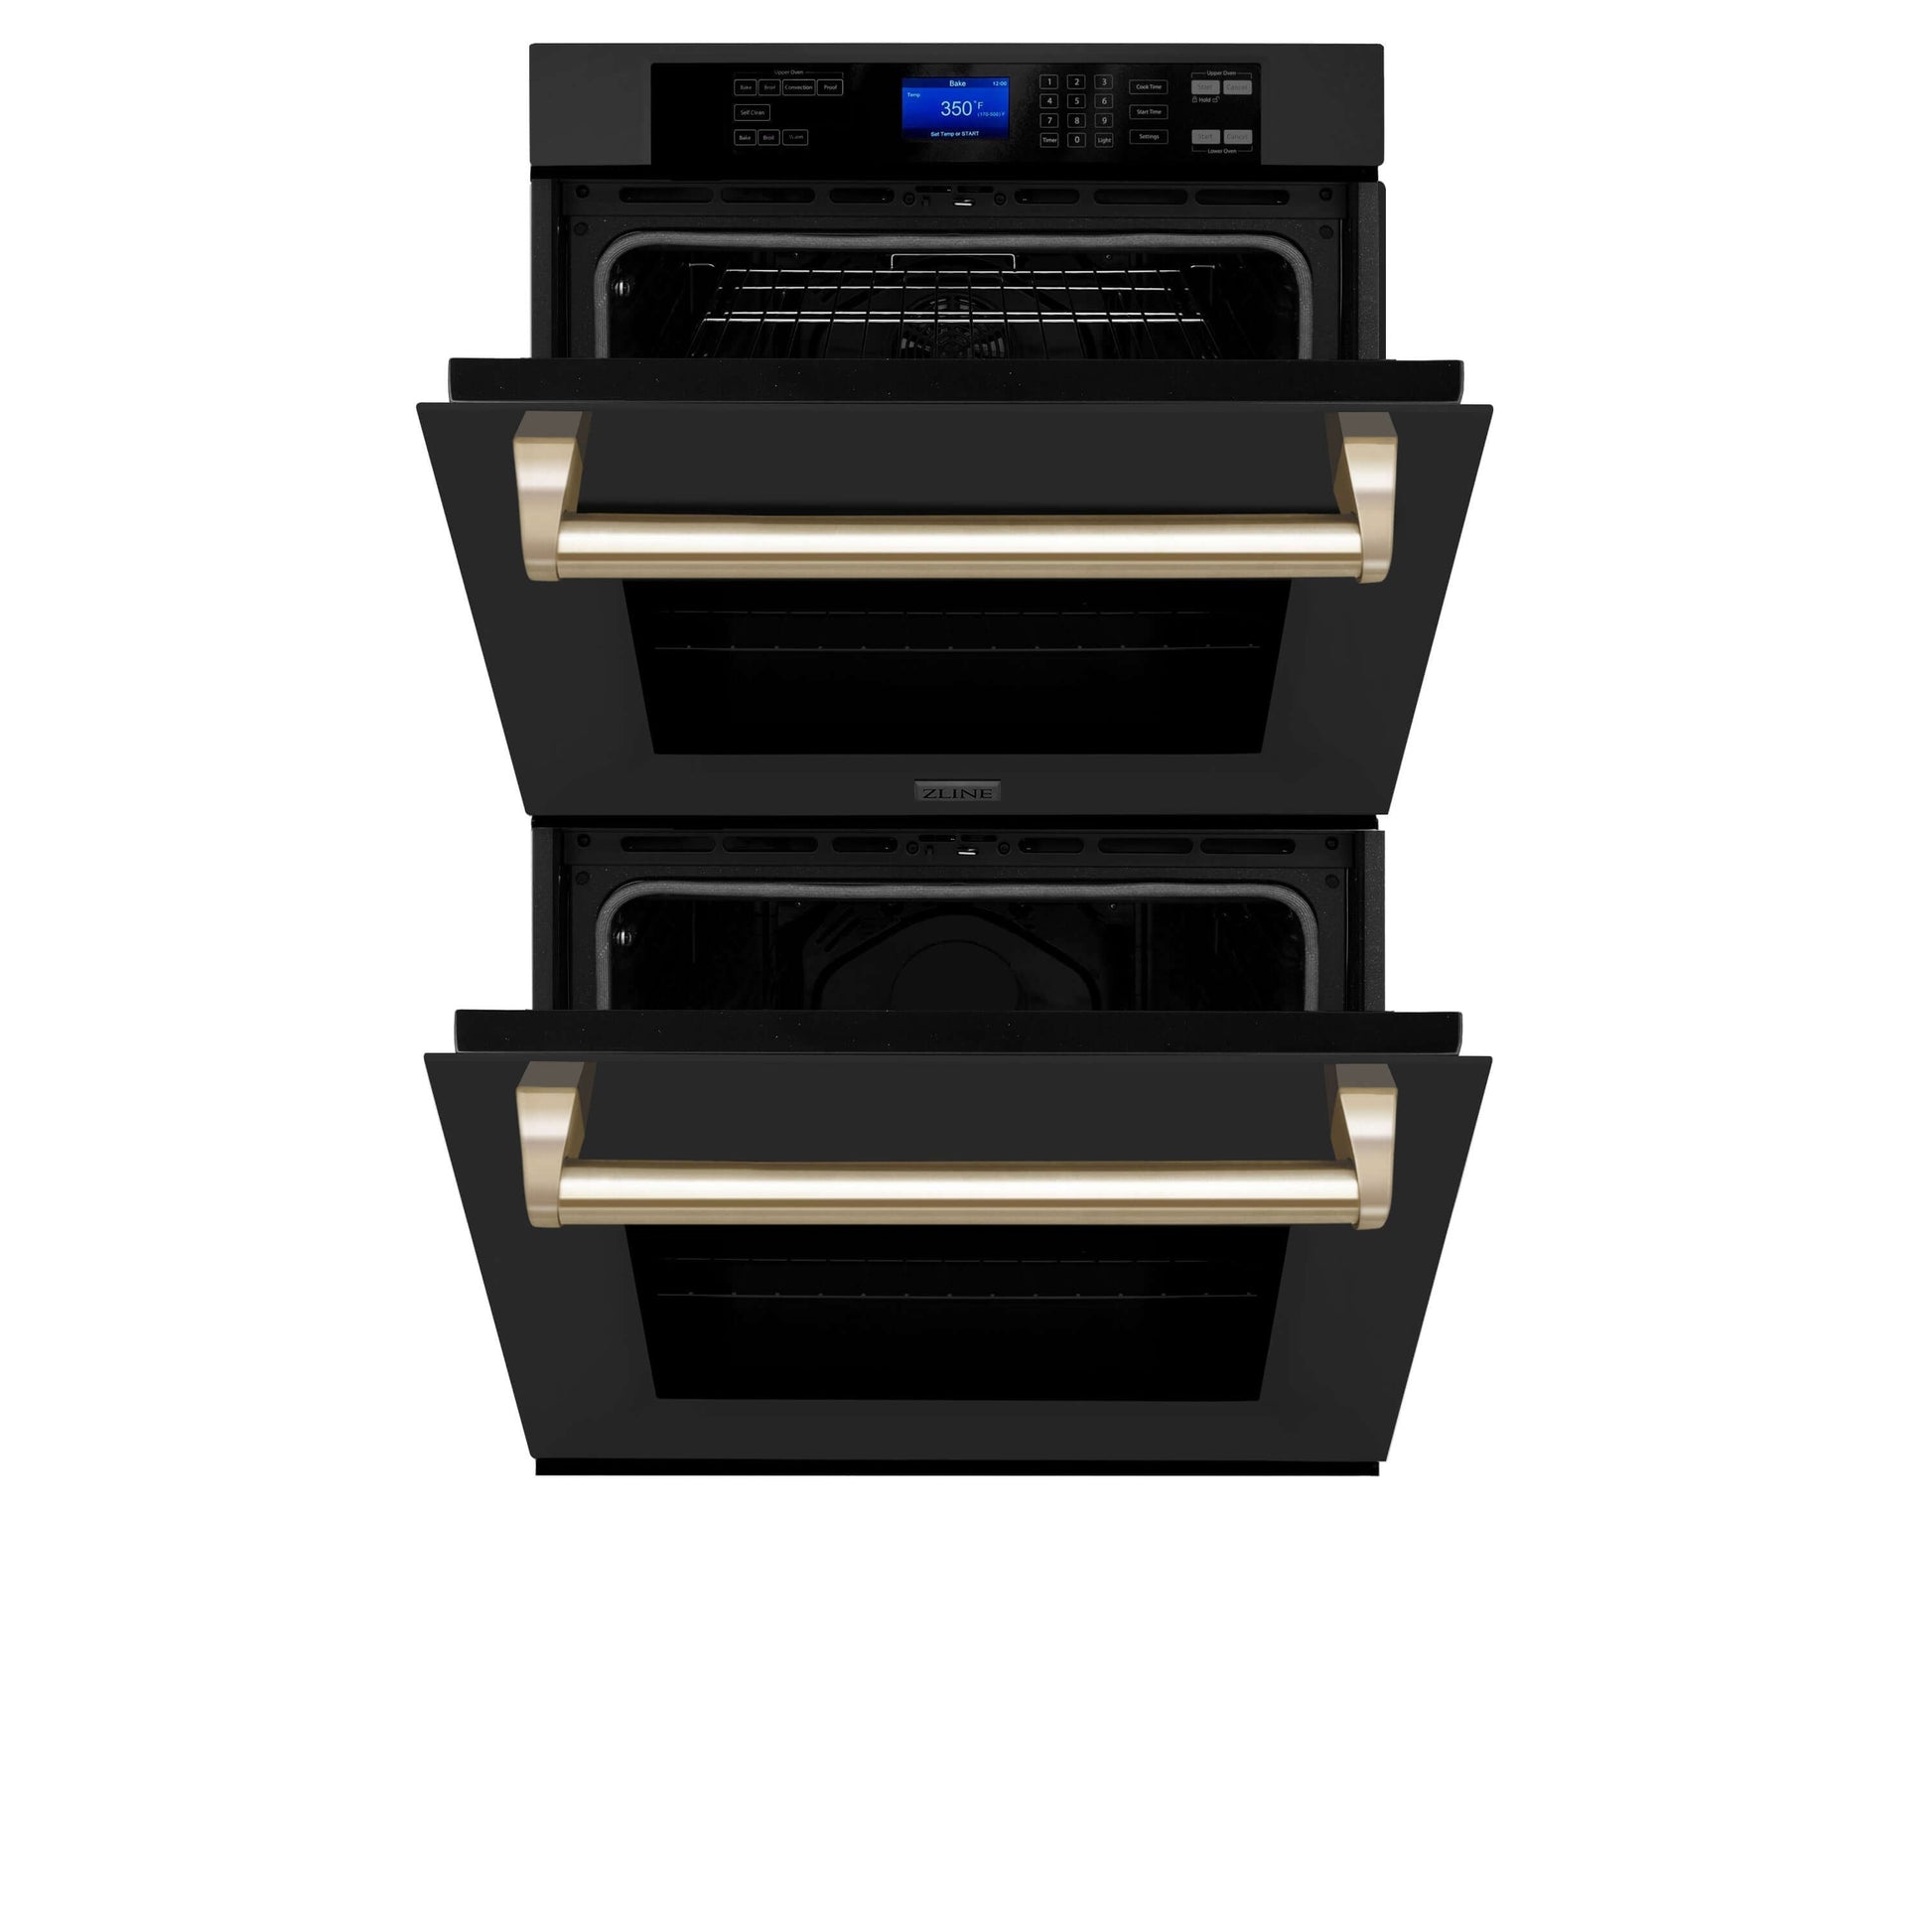 ZLINE Autograph Edition 30 in. Electric Double Wall Oven with Self Clean and True Convection in Black Stainless Steel and Polished Gold Accents (AWDZ-30-BS-G) front, half open.